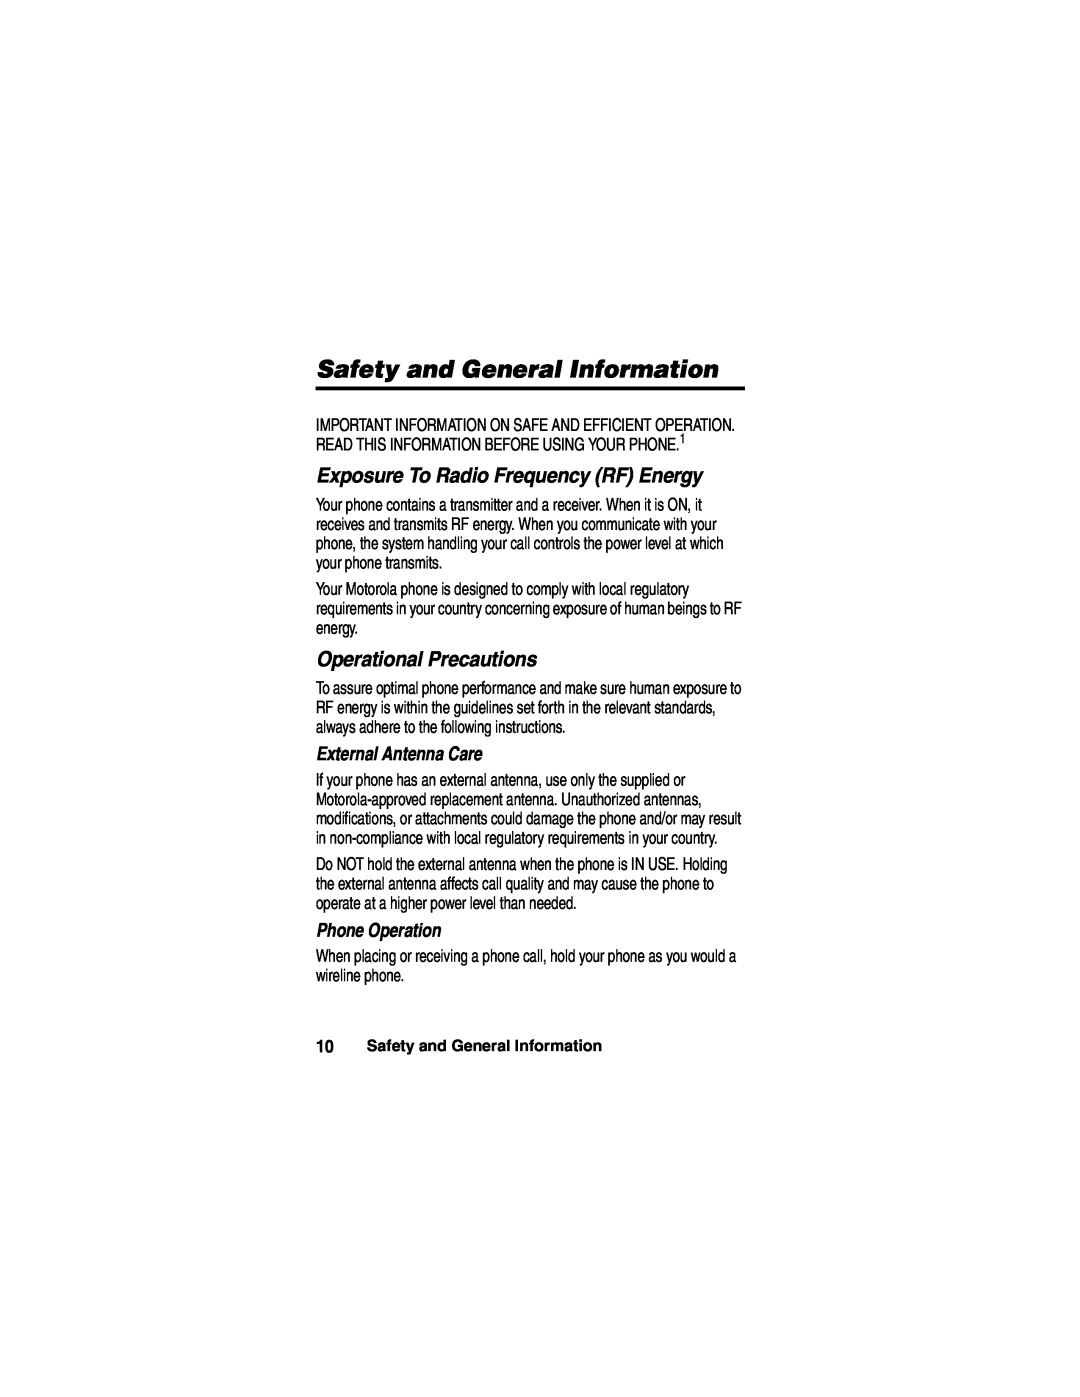 Motorola A780 manual Safety and General Information, Exposure To Radio Frequency RF Energy, Operational Precautions 